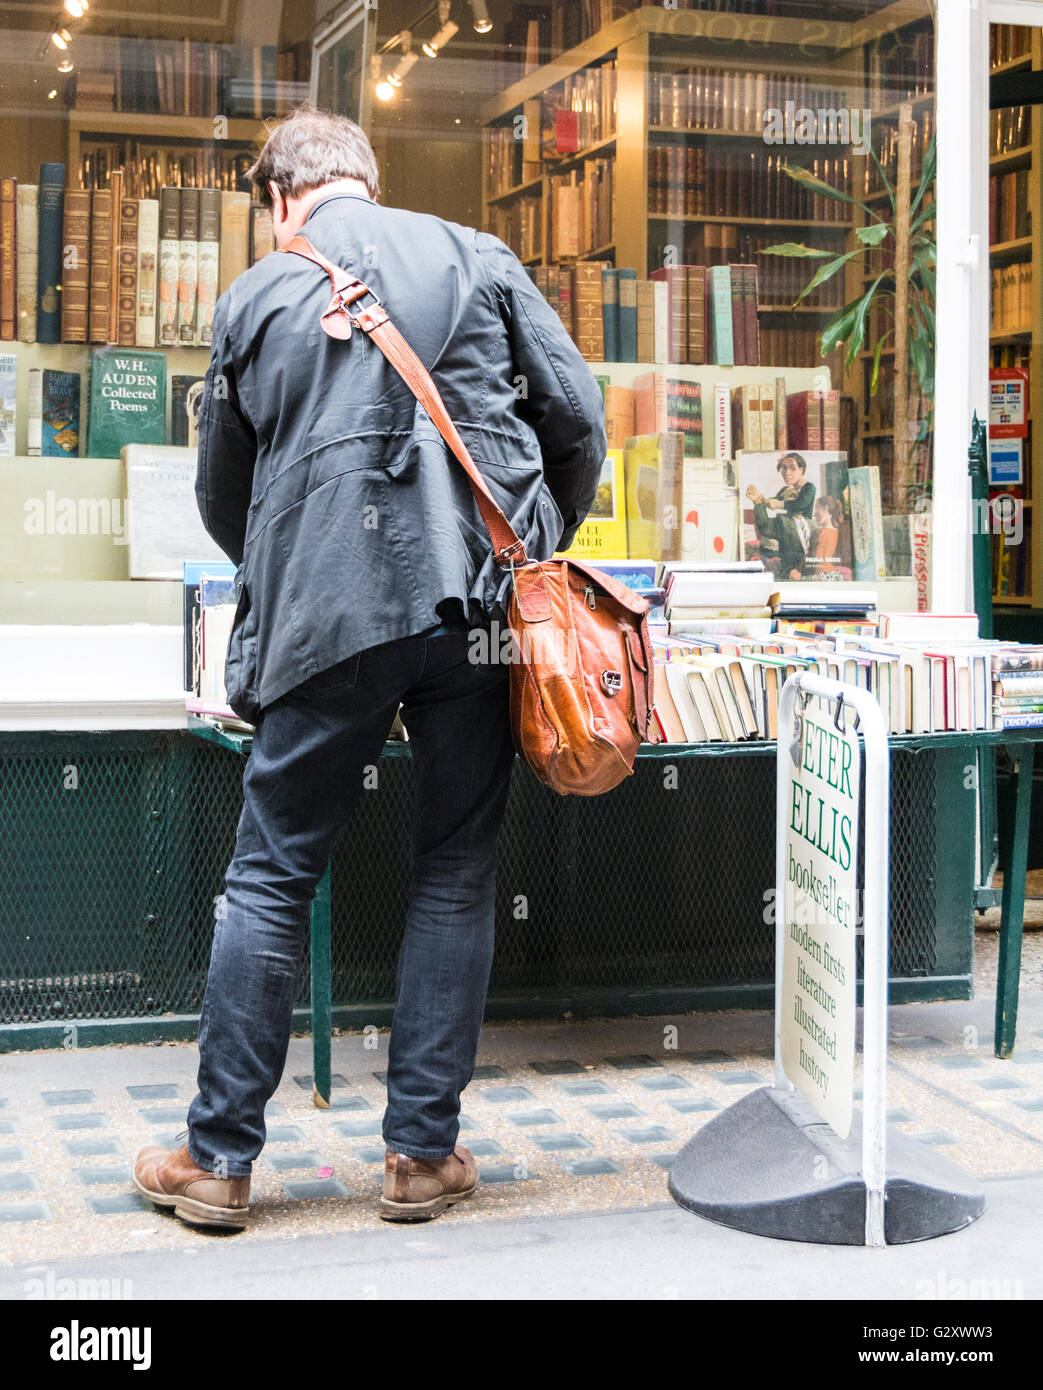 People searching for rare and antiquarian bookshops on Cecil Court, Covent Garden, London, UK Stock Photo